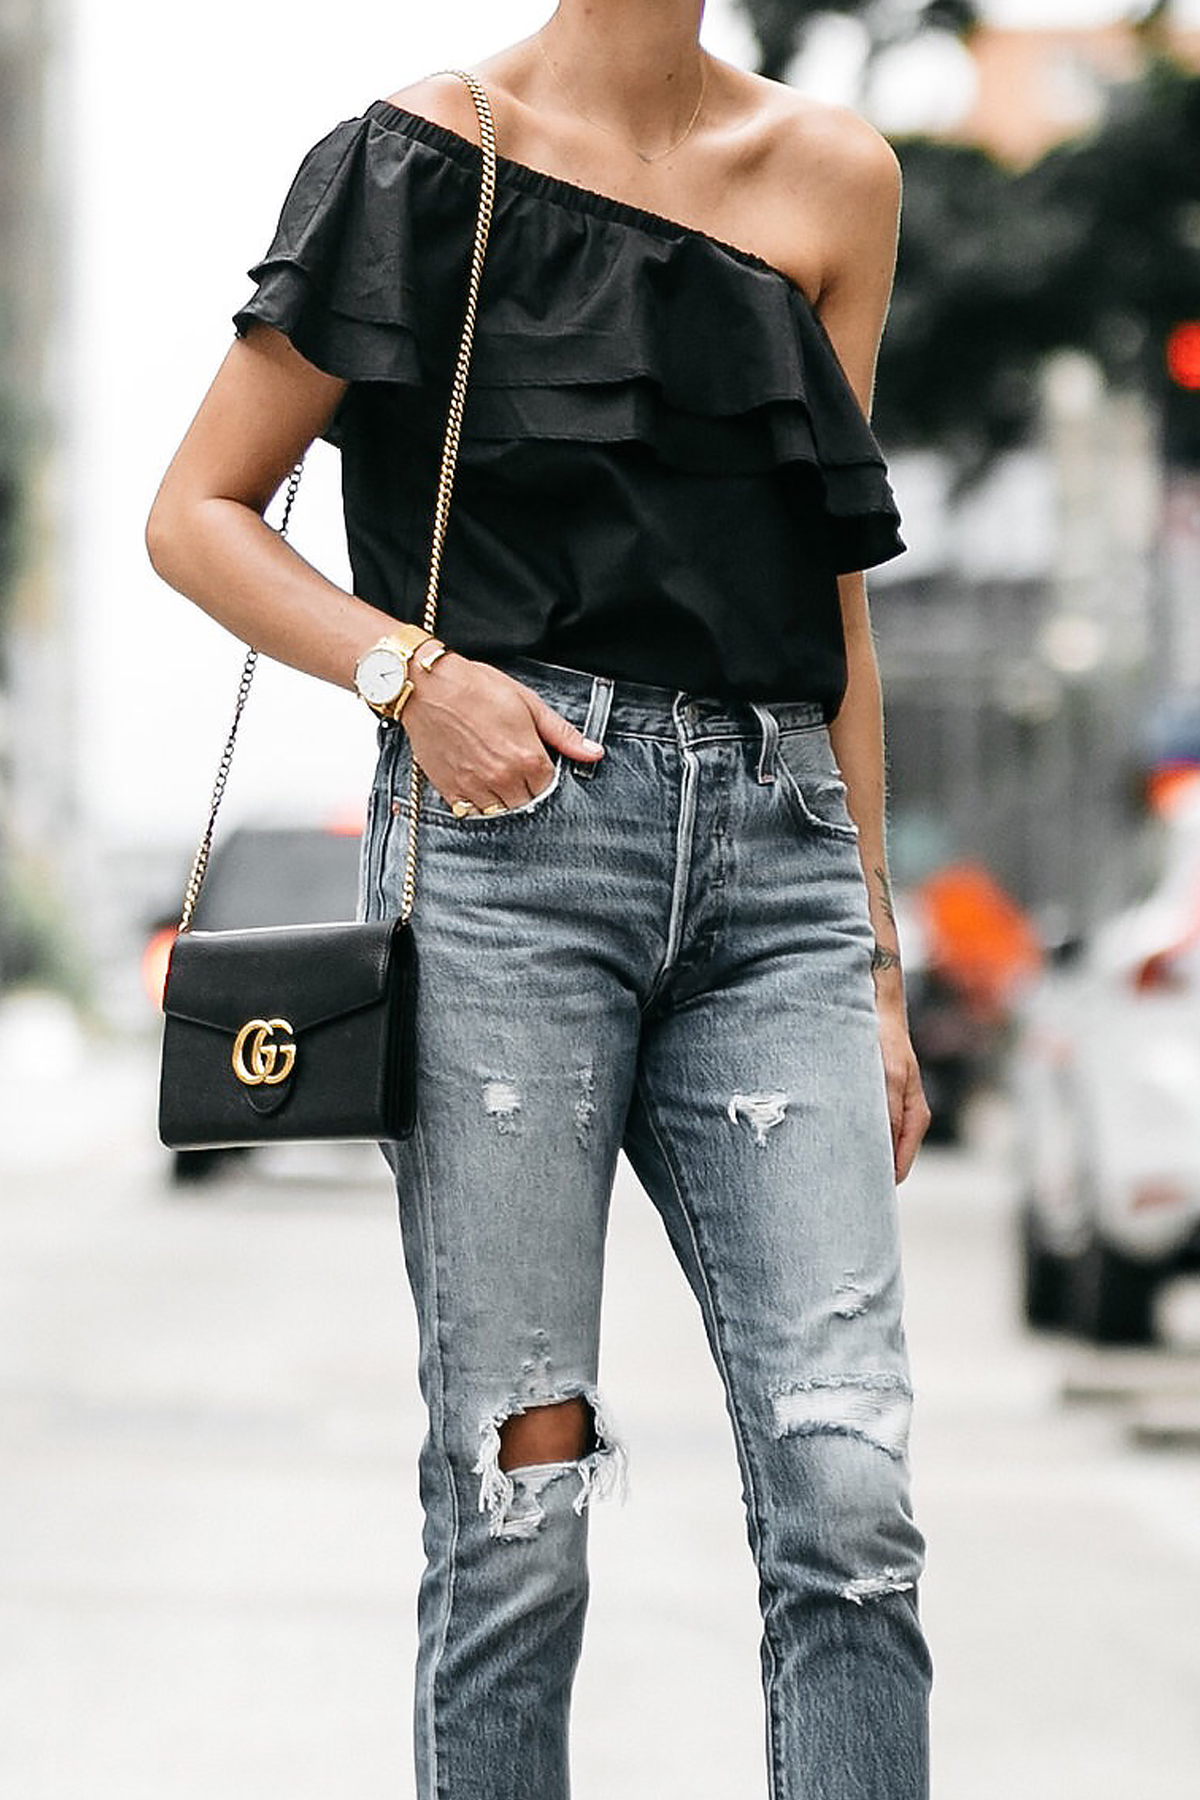 nordstrom black one shoulder ruffle top distressed jeans outfit gucci marmont handbag street style dallas blogger fashion blogger